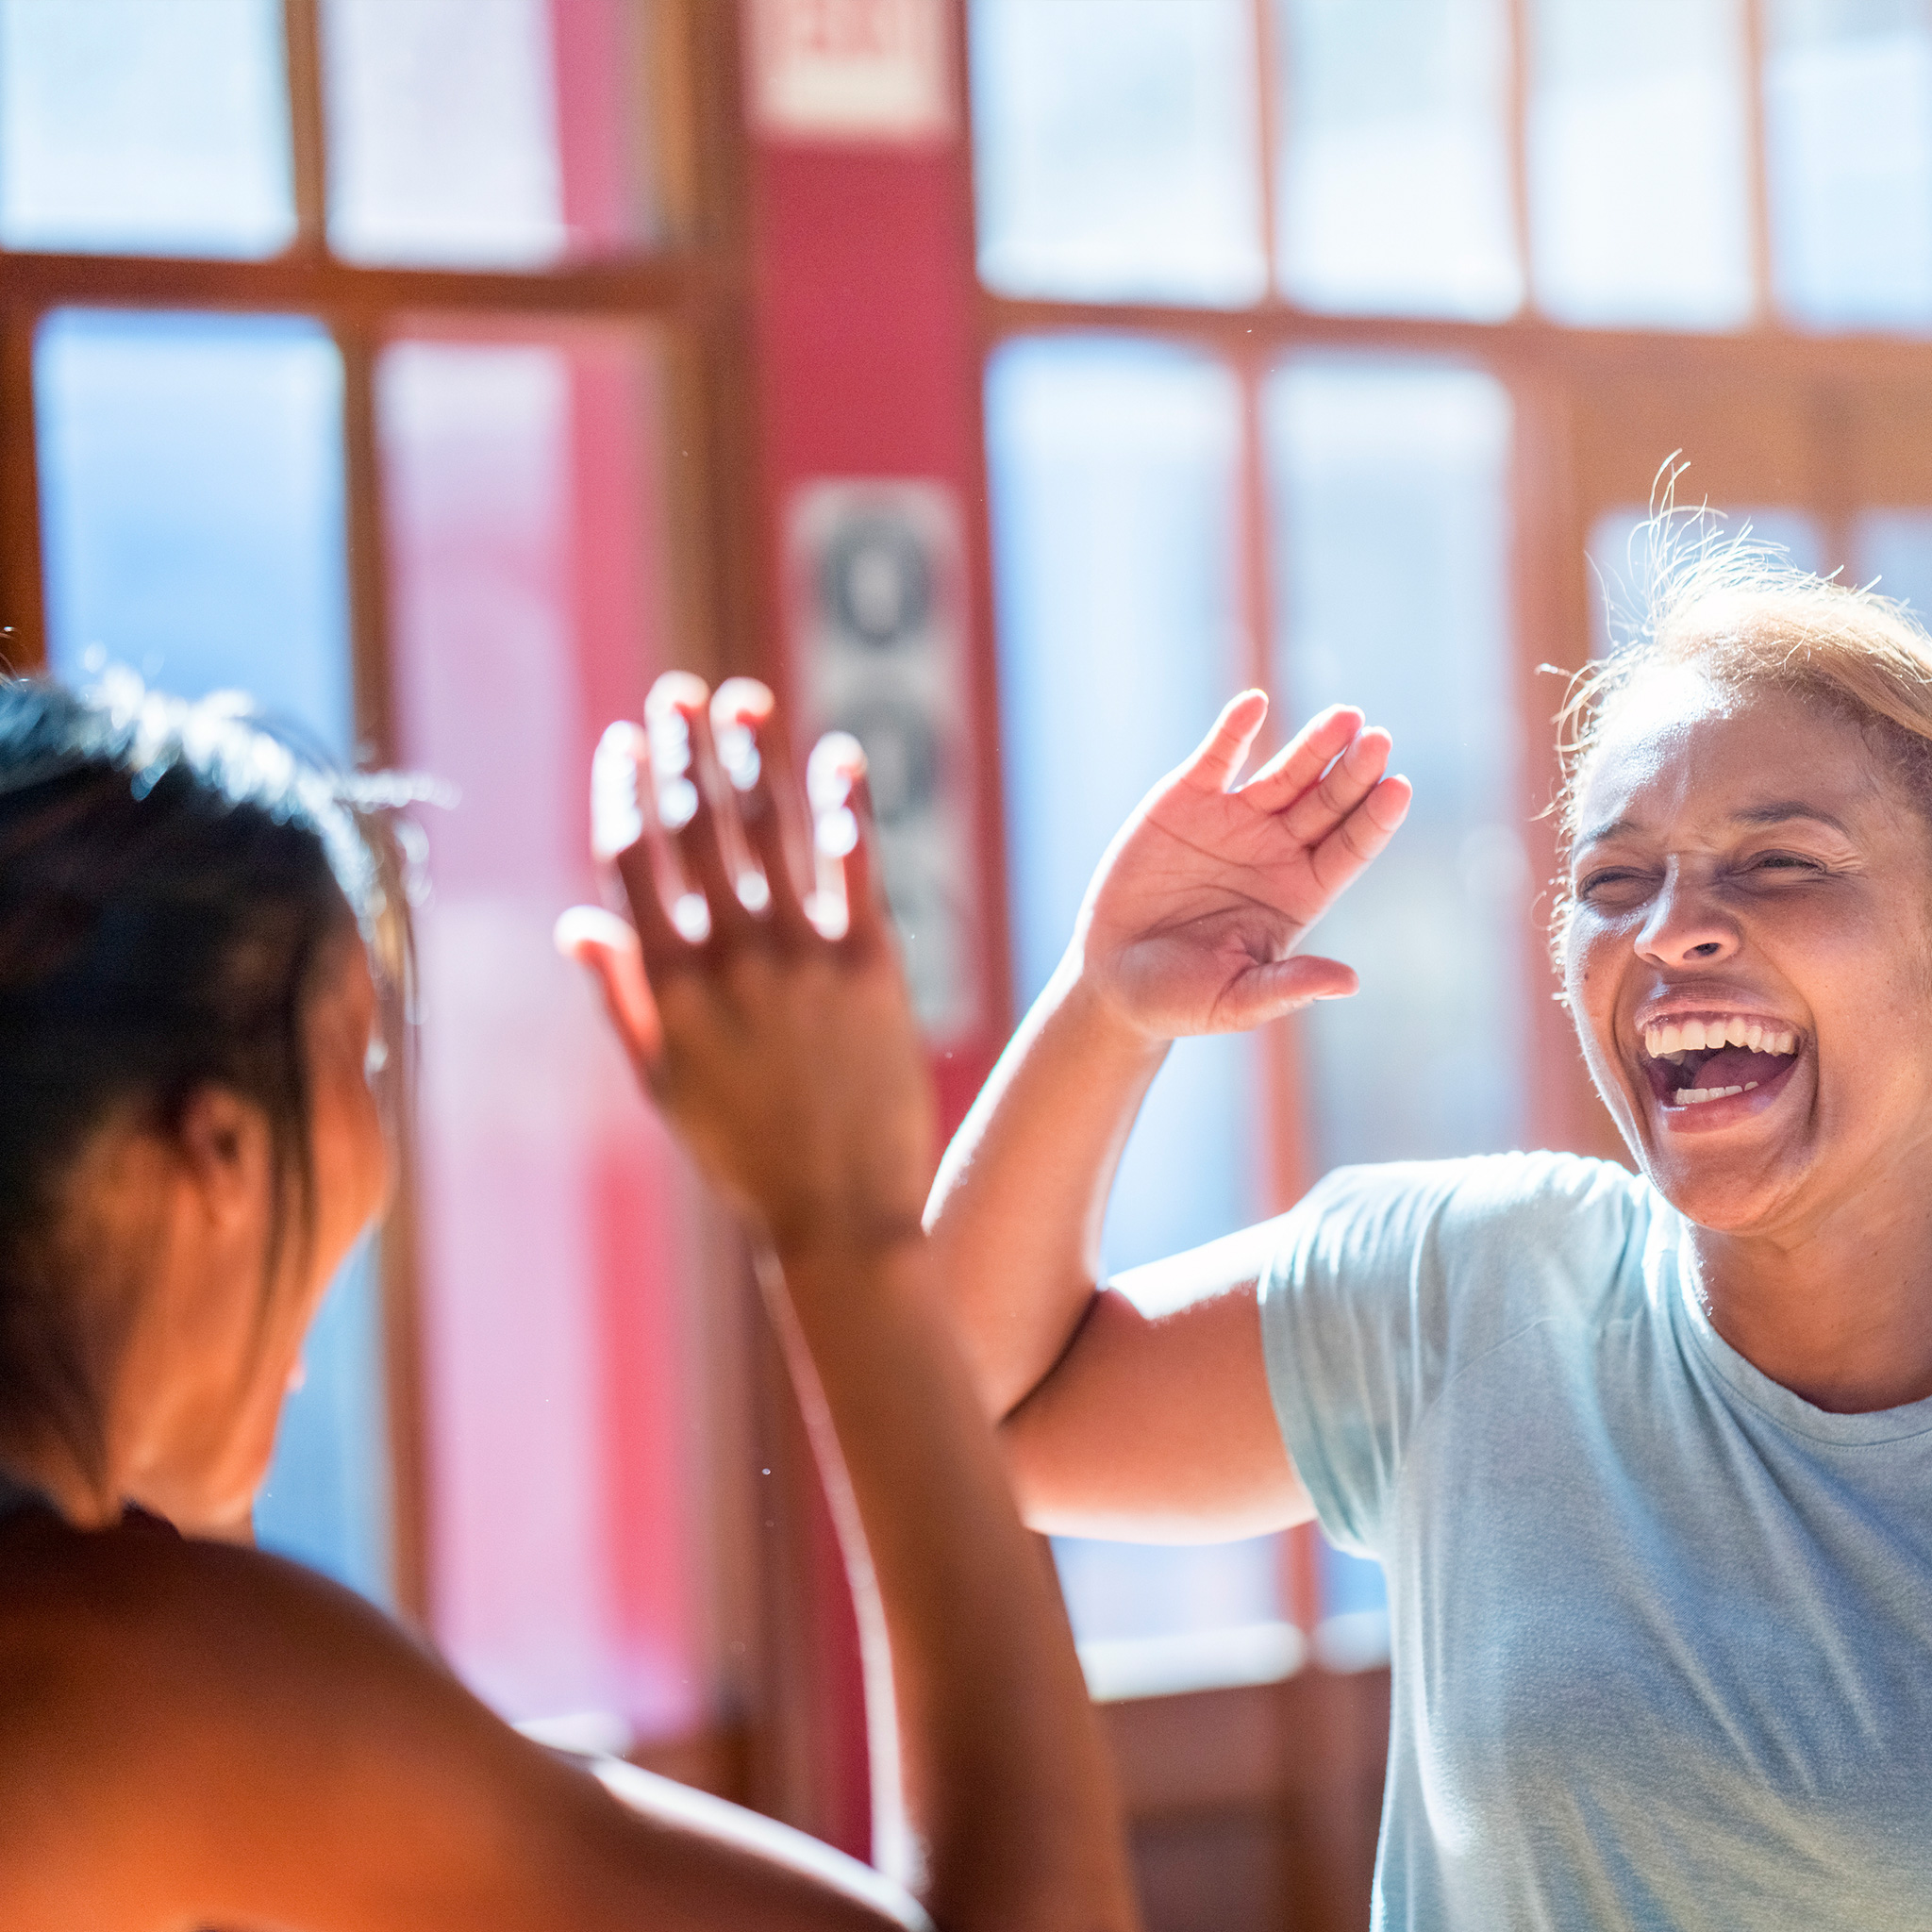 two women high-fiving after workout